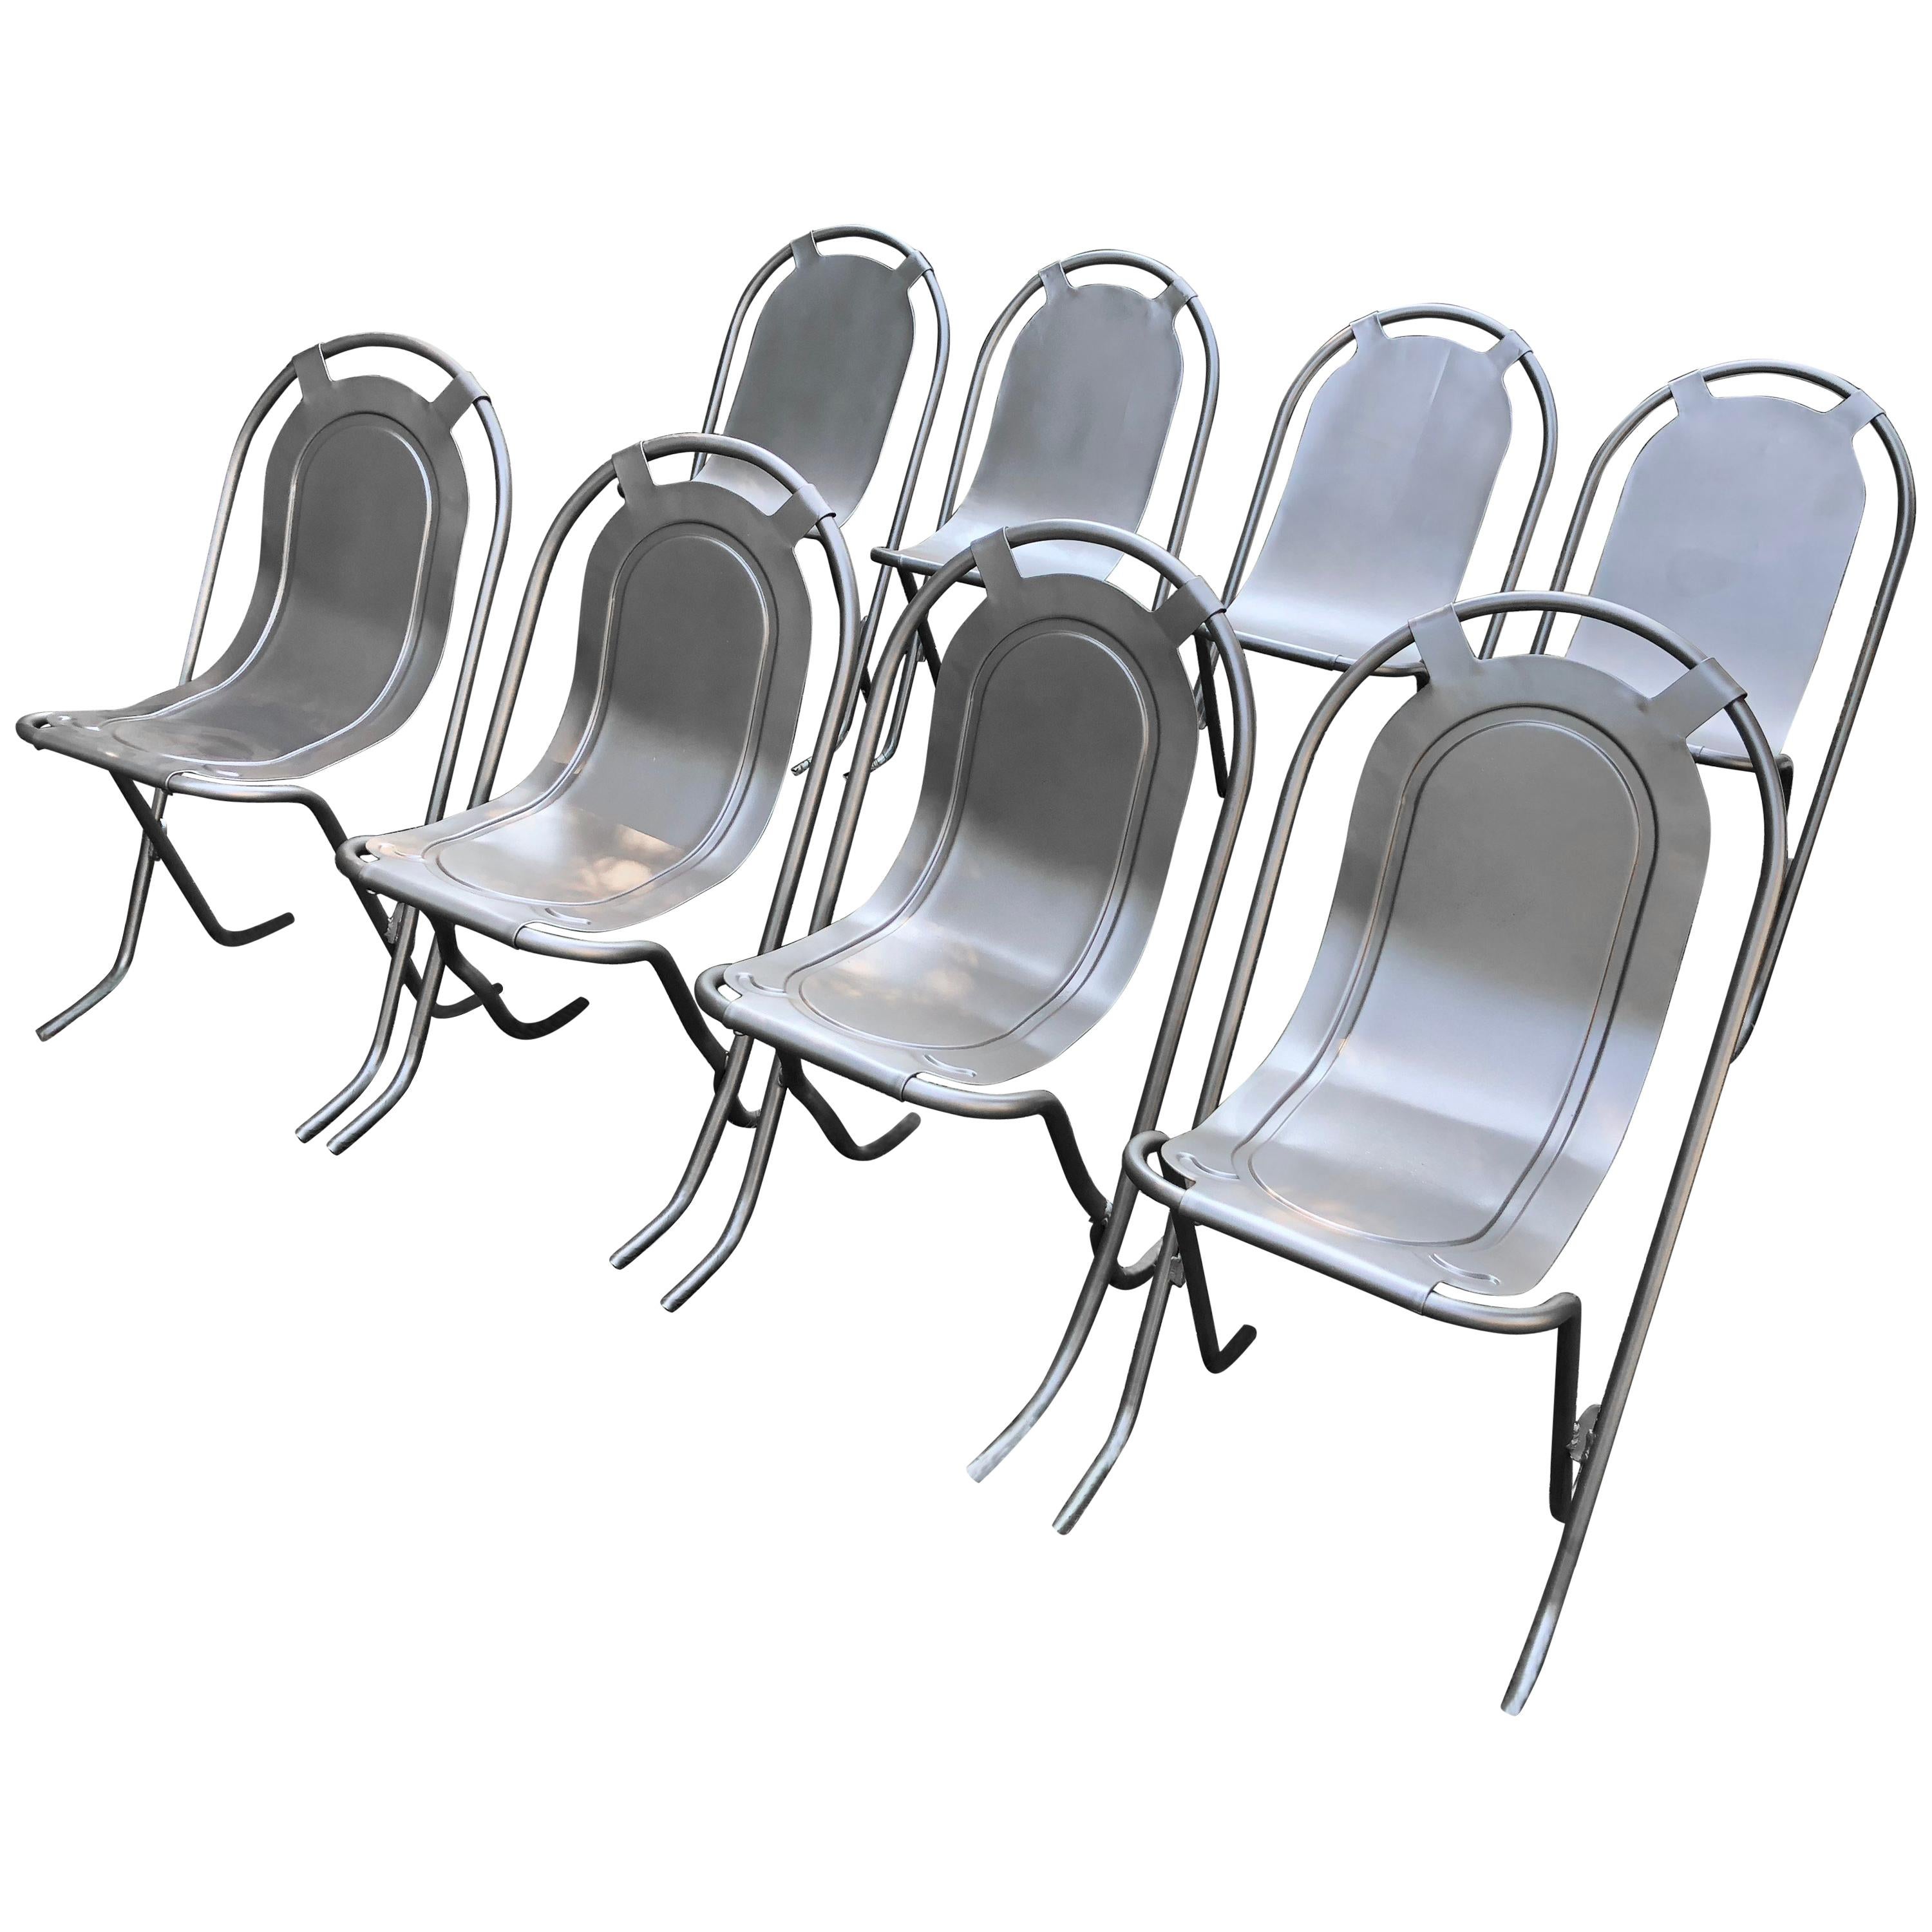 Harlequin Set of Eight Steel Stak-A-Bye Chairs, Newly Powder-Coated